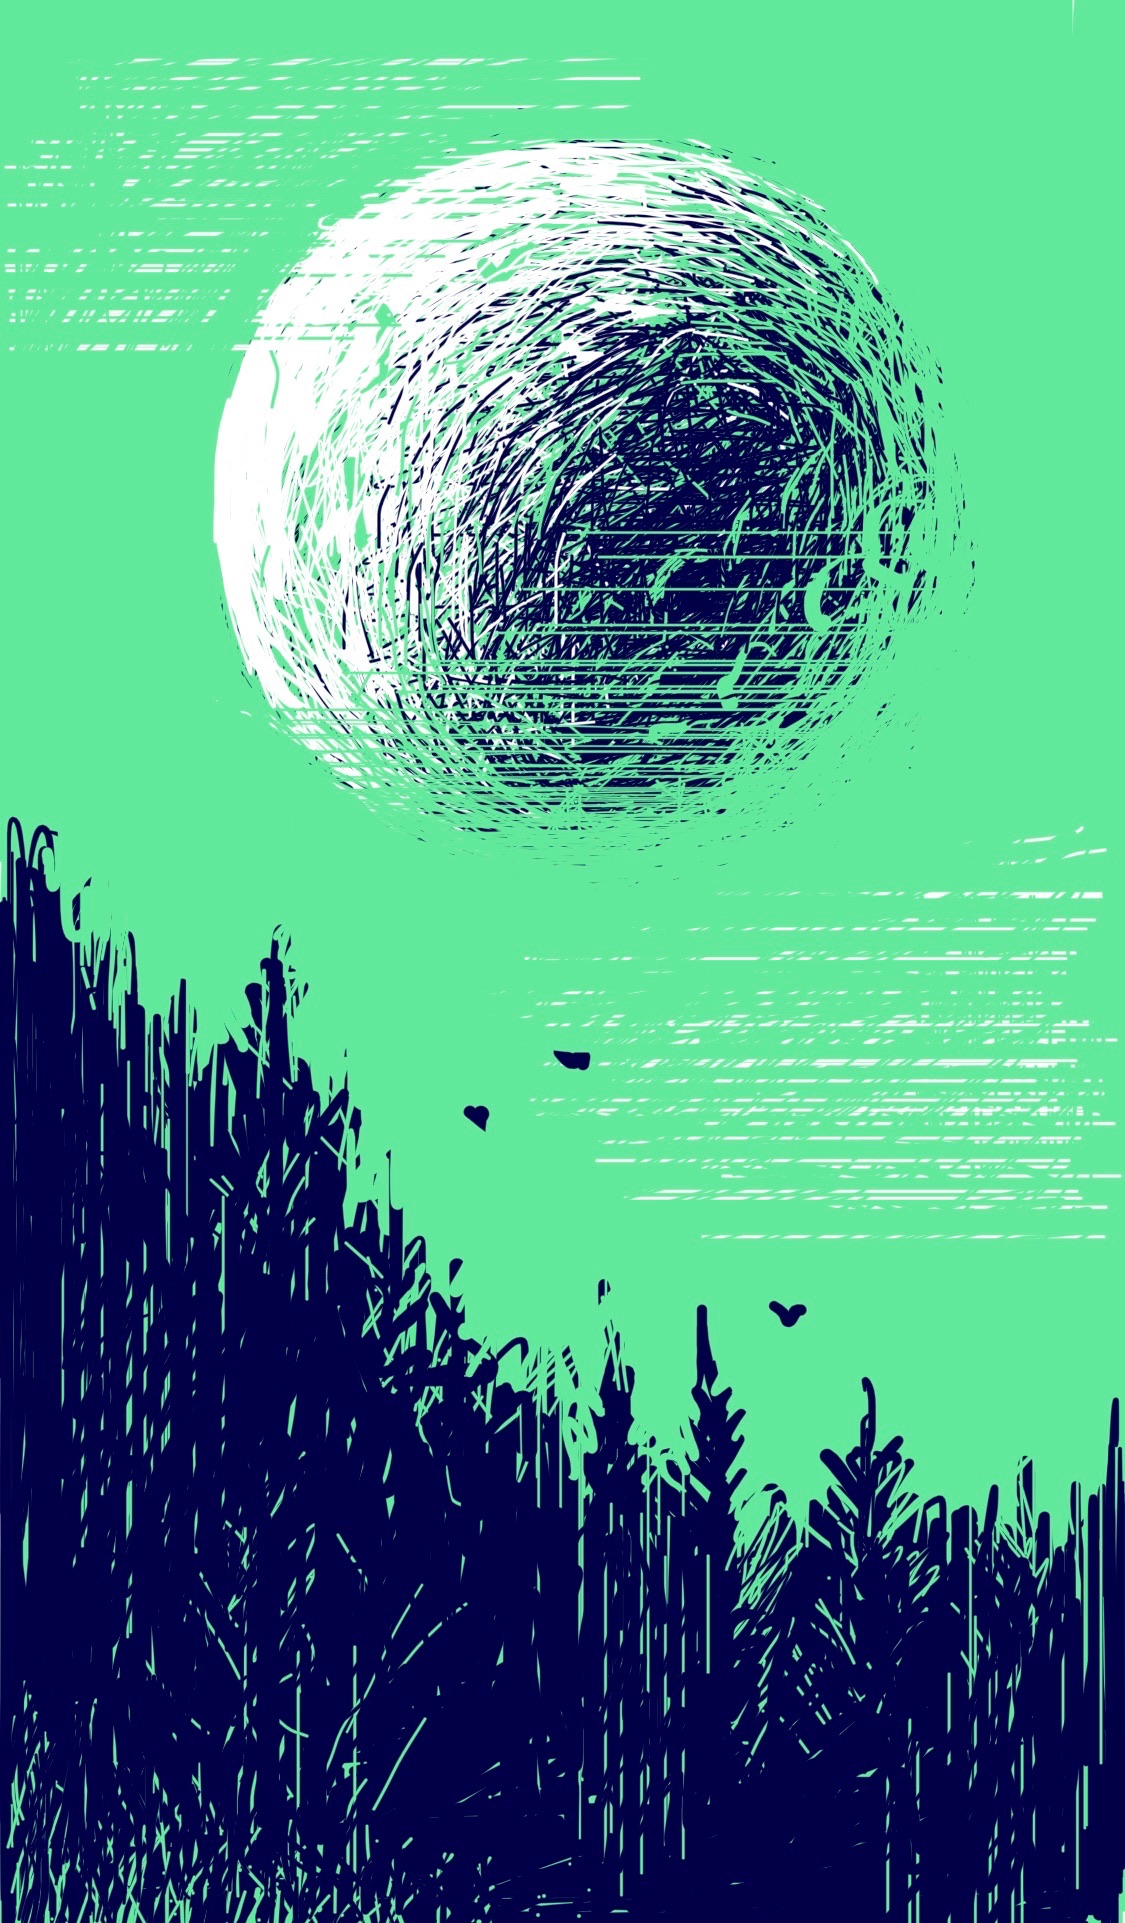 A huge moonlike planet hangs in the sky over a forest